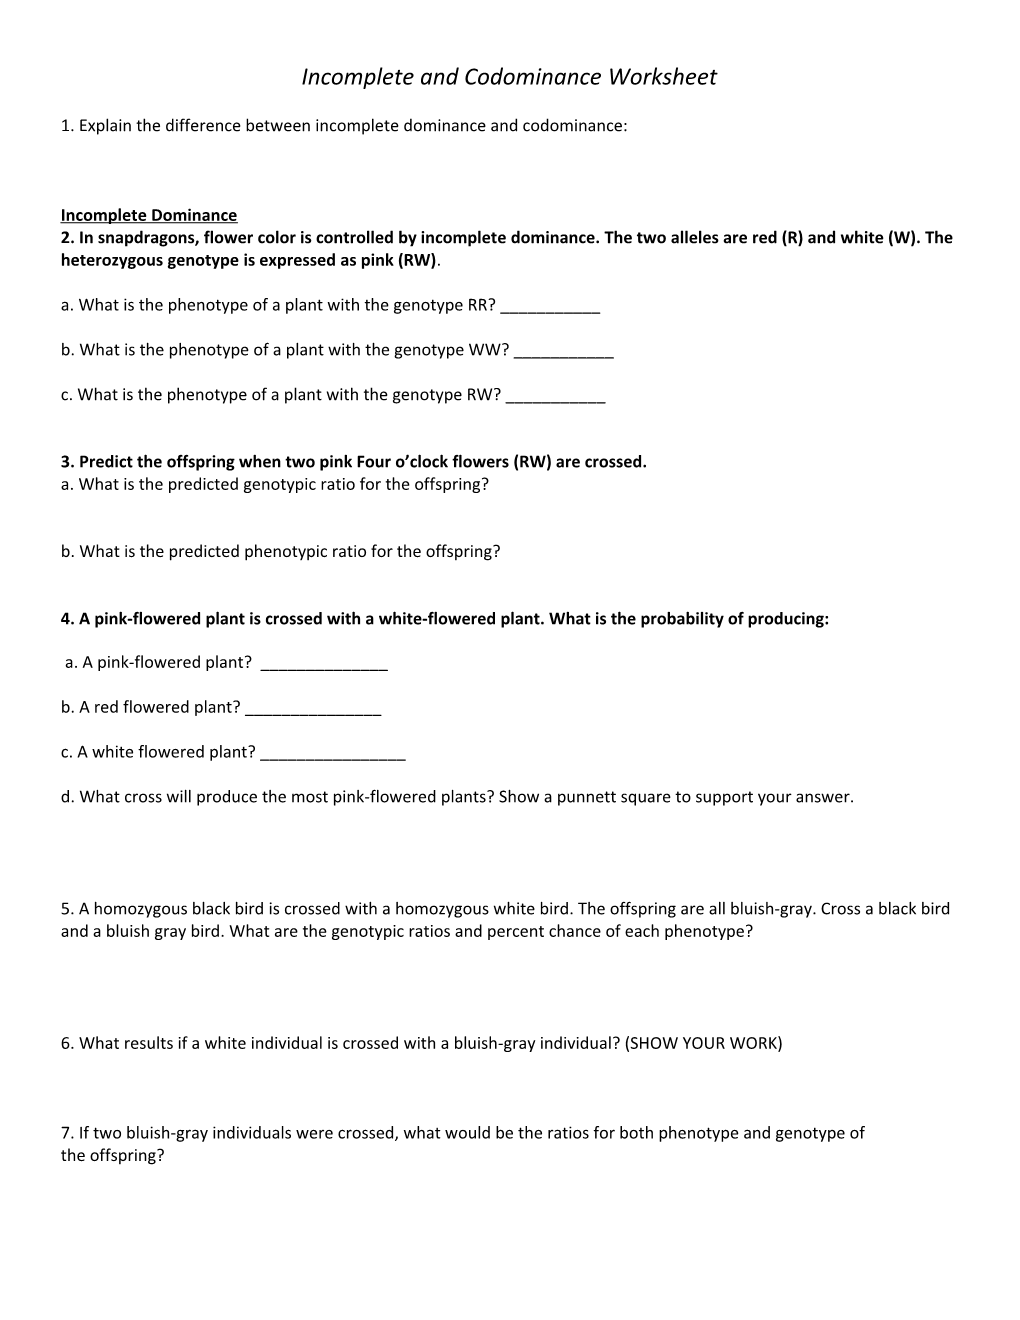 Incomplete and Codominance Worksheet